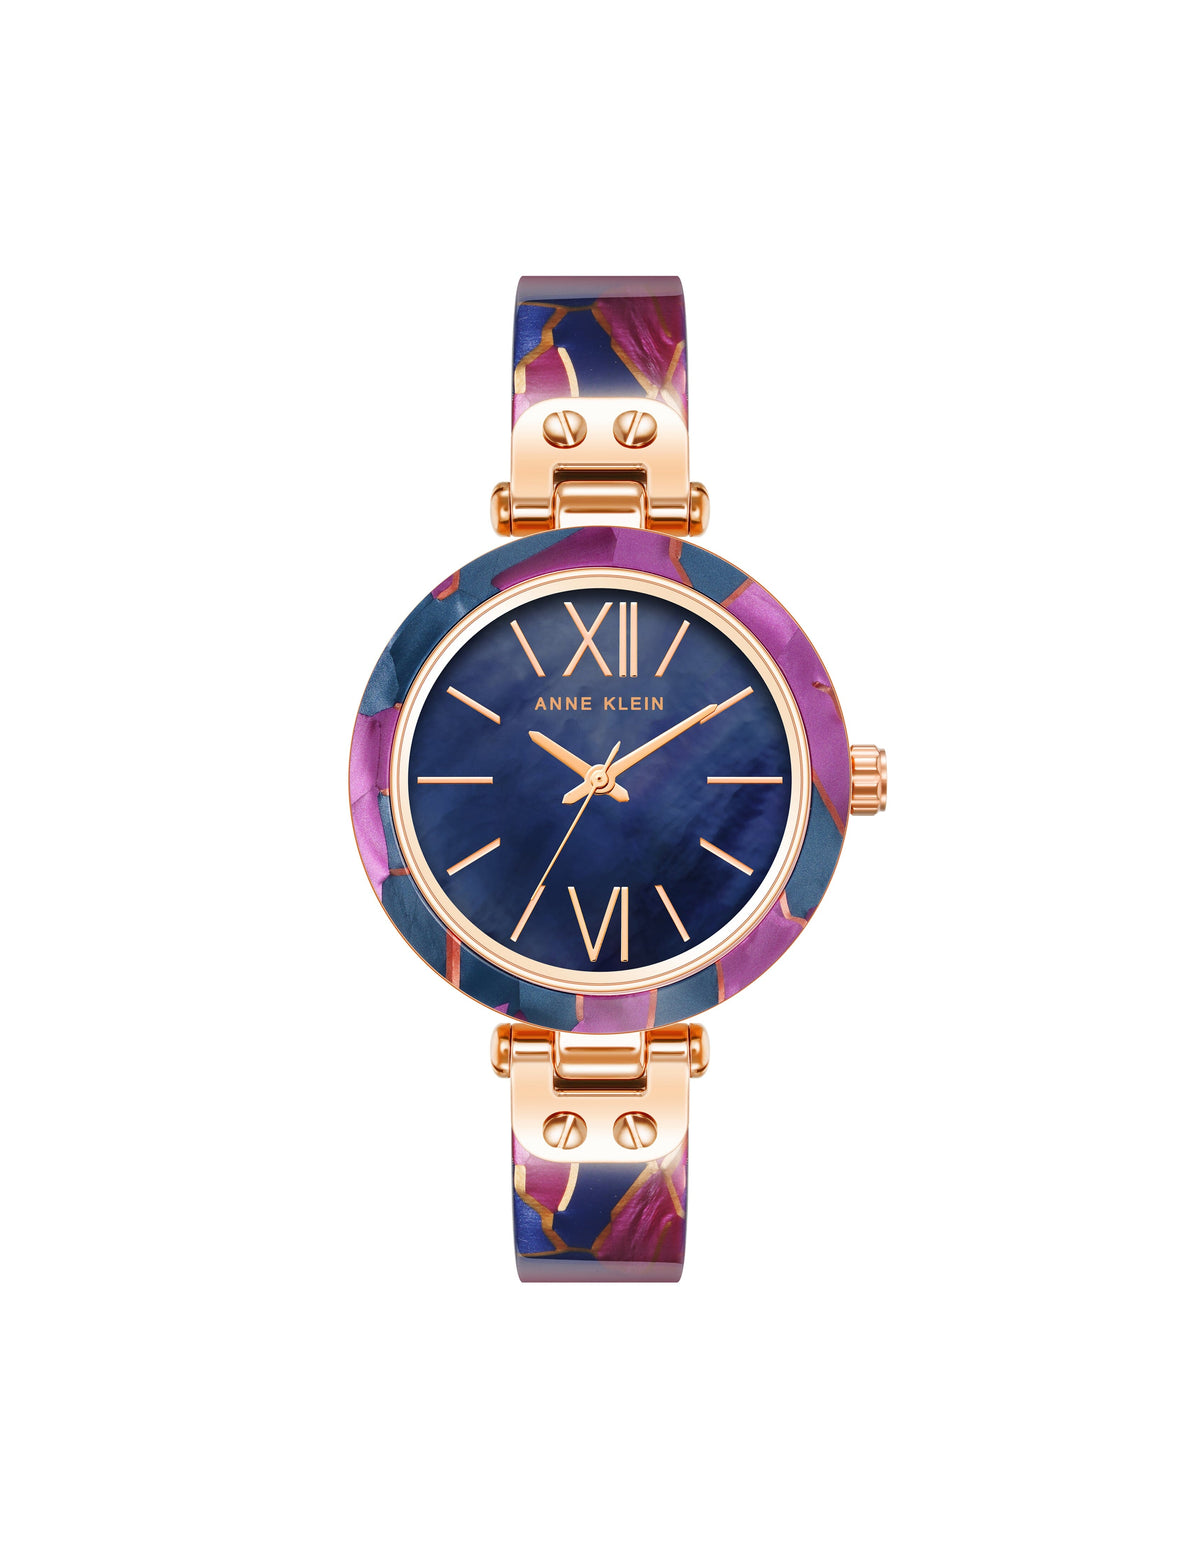 Anne Klein Rose Gold-Tone/ Navy/ Purple Multi-Color Resin Watch